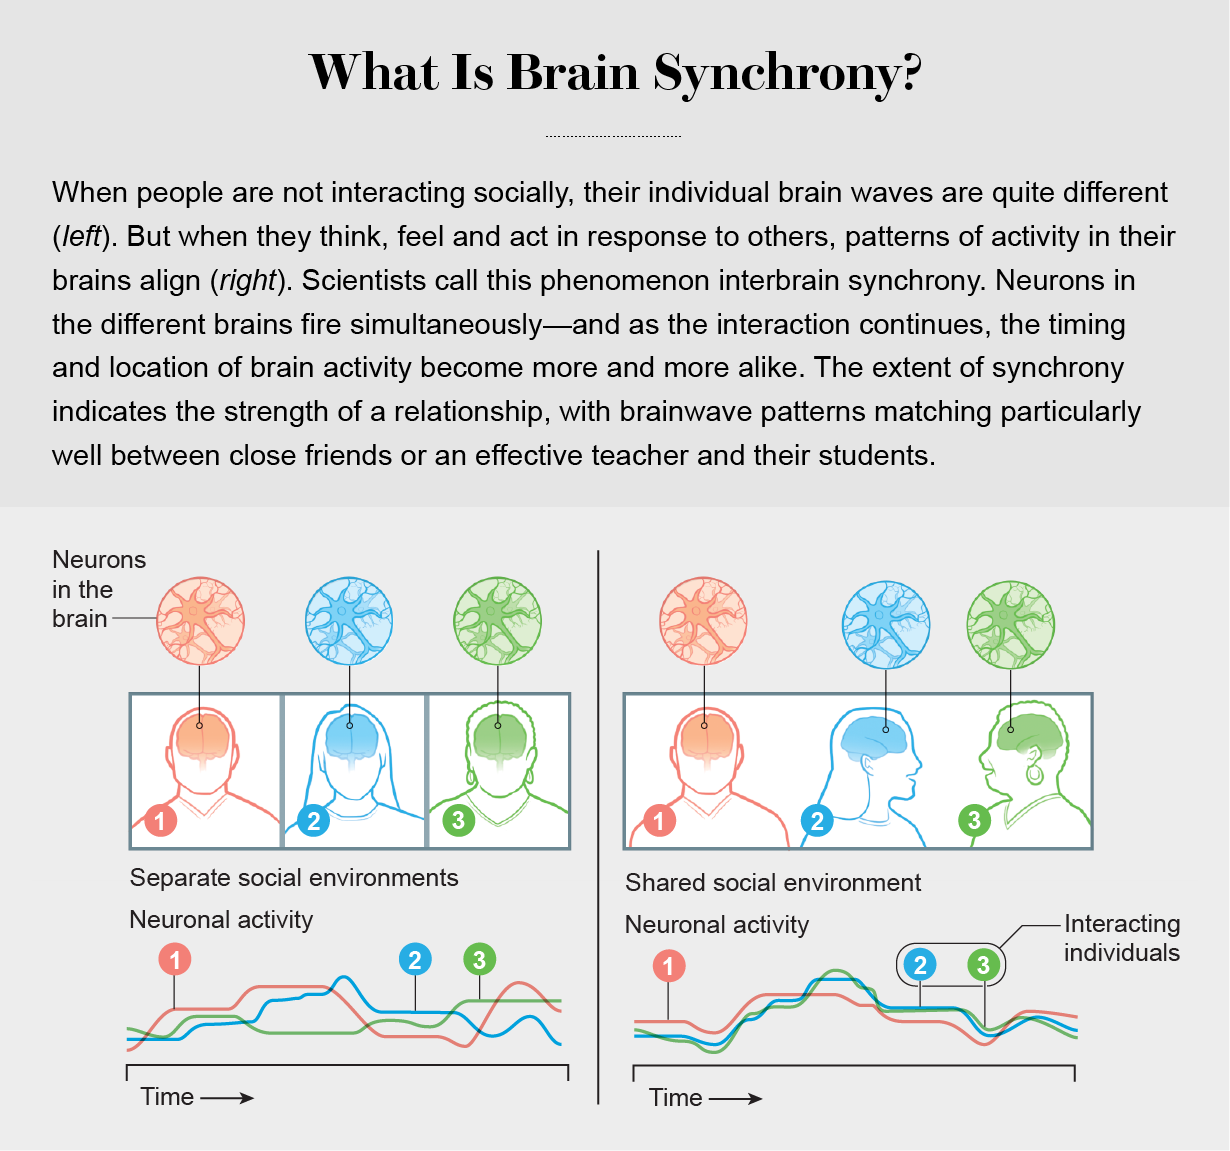 Graphic shows how brain waves vary among people who are in separate social environments but become aligned in a shared social environment, especially among those interacting with one another.